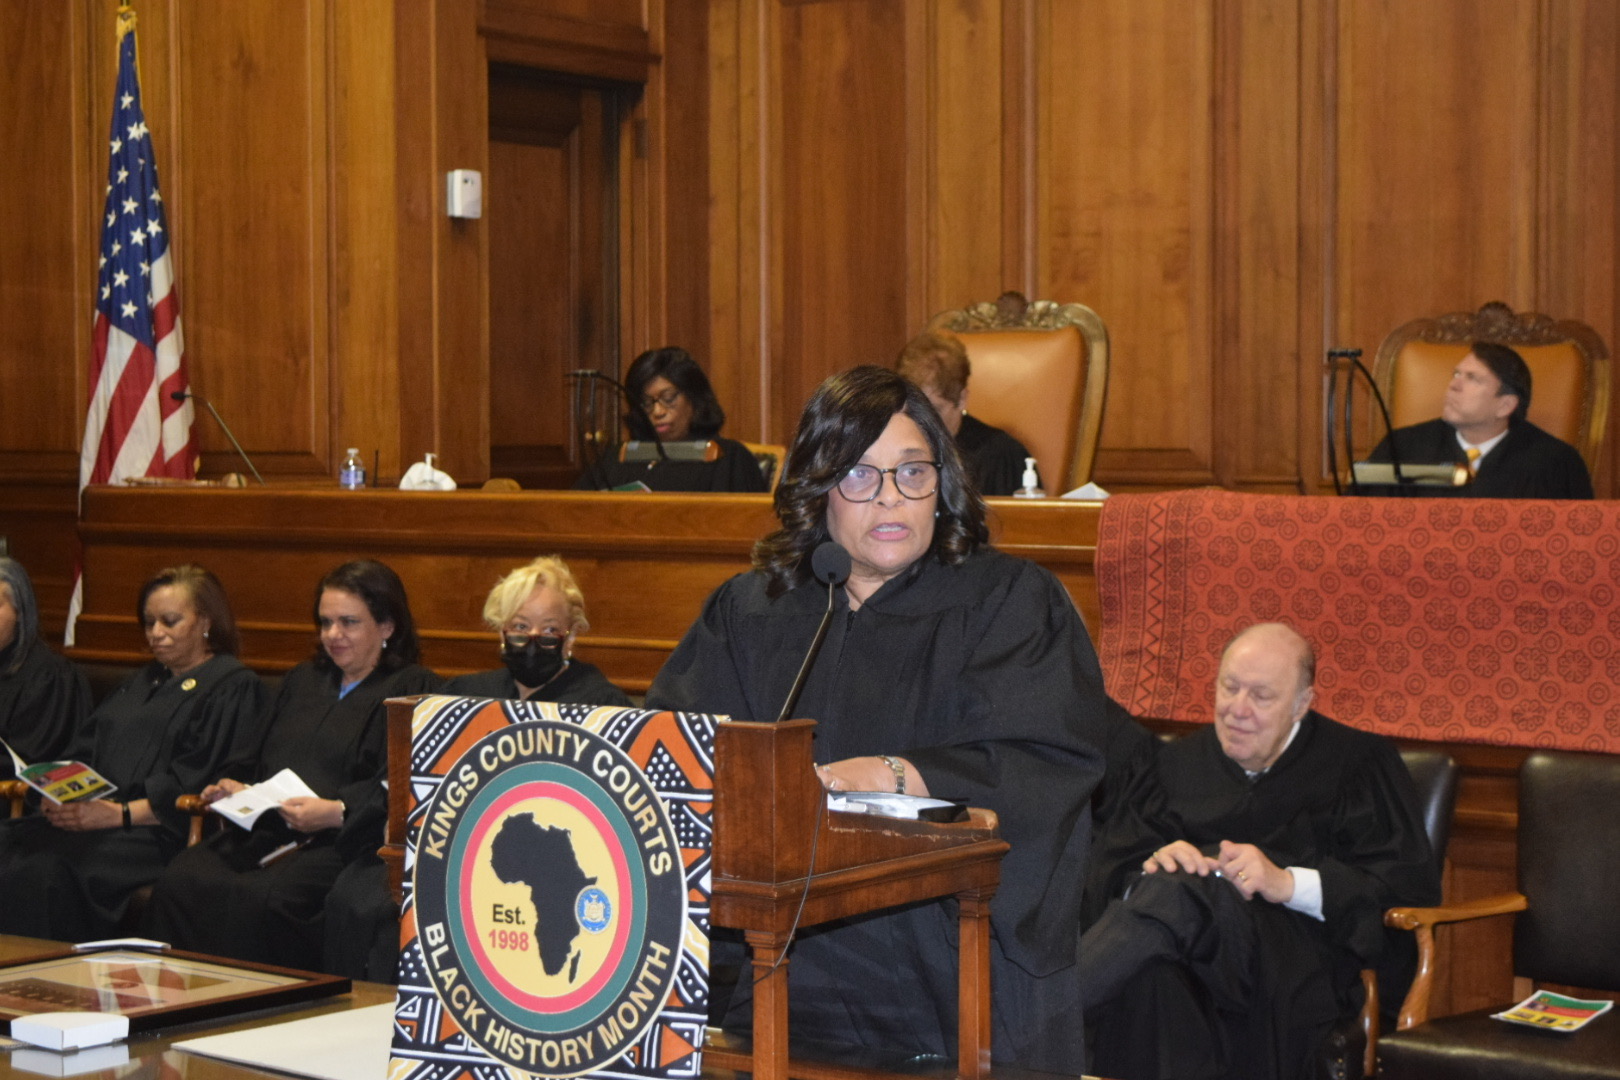 Hon. Cheryl Gonzalez served as the mistress of ceremony during the AD's Black History Month awards.